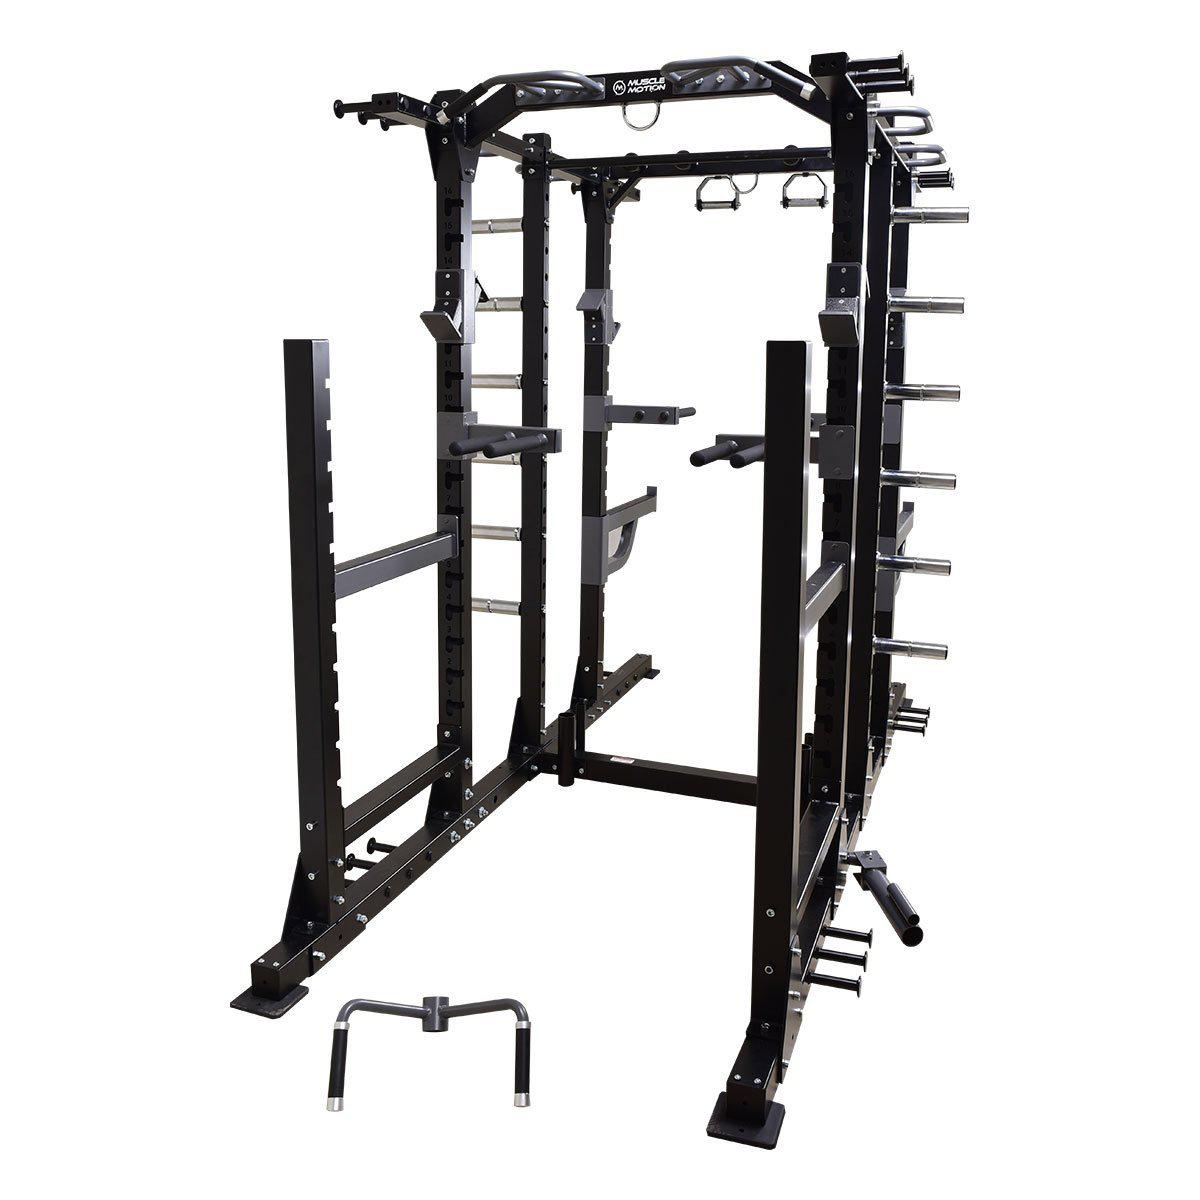 MM 8-GEN Commercial 2 Station Power Squat Rack W Storage-Commercial Power Rack-Gym Direct